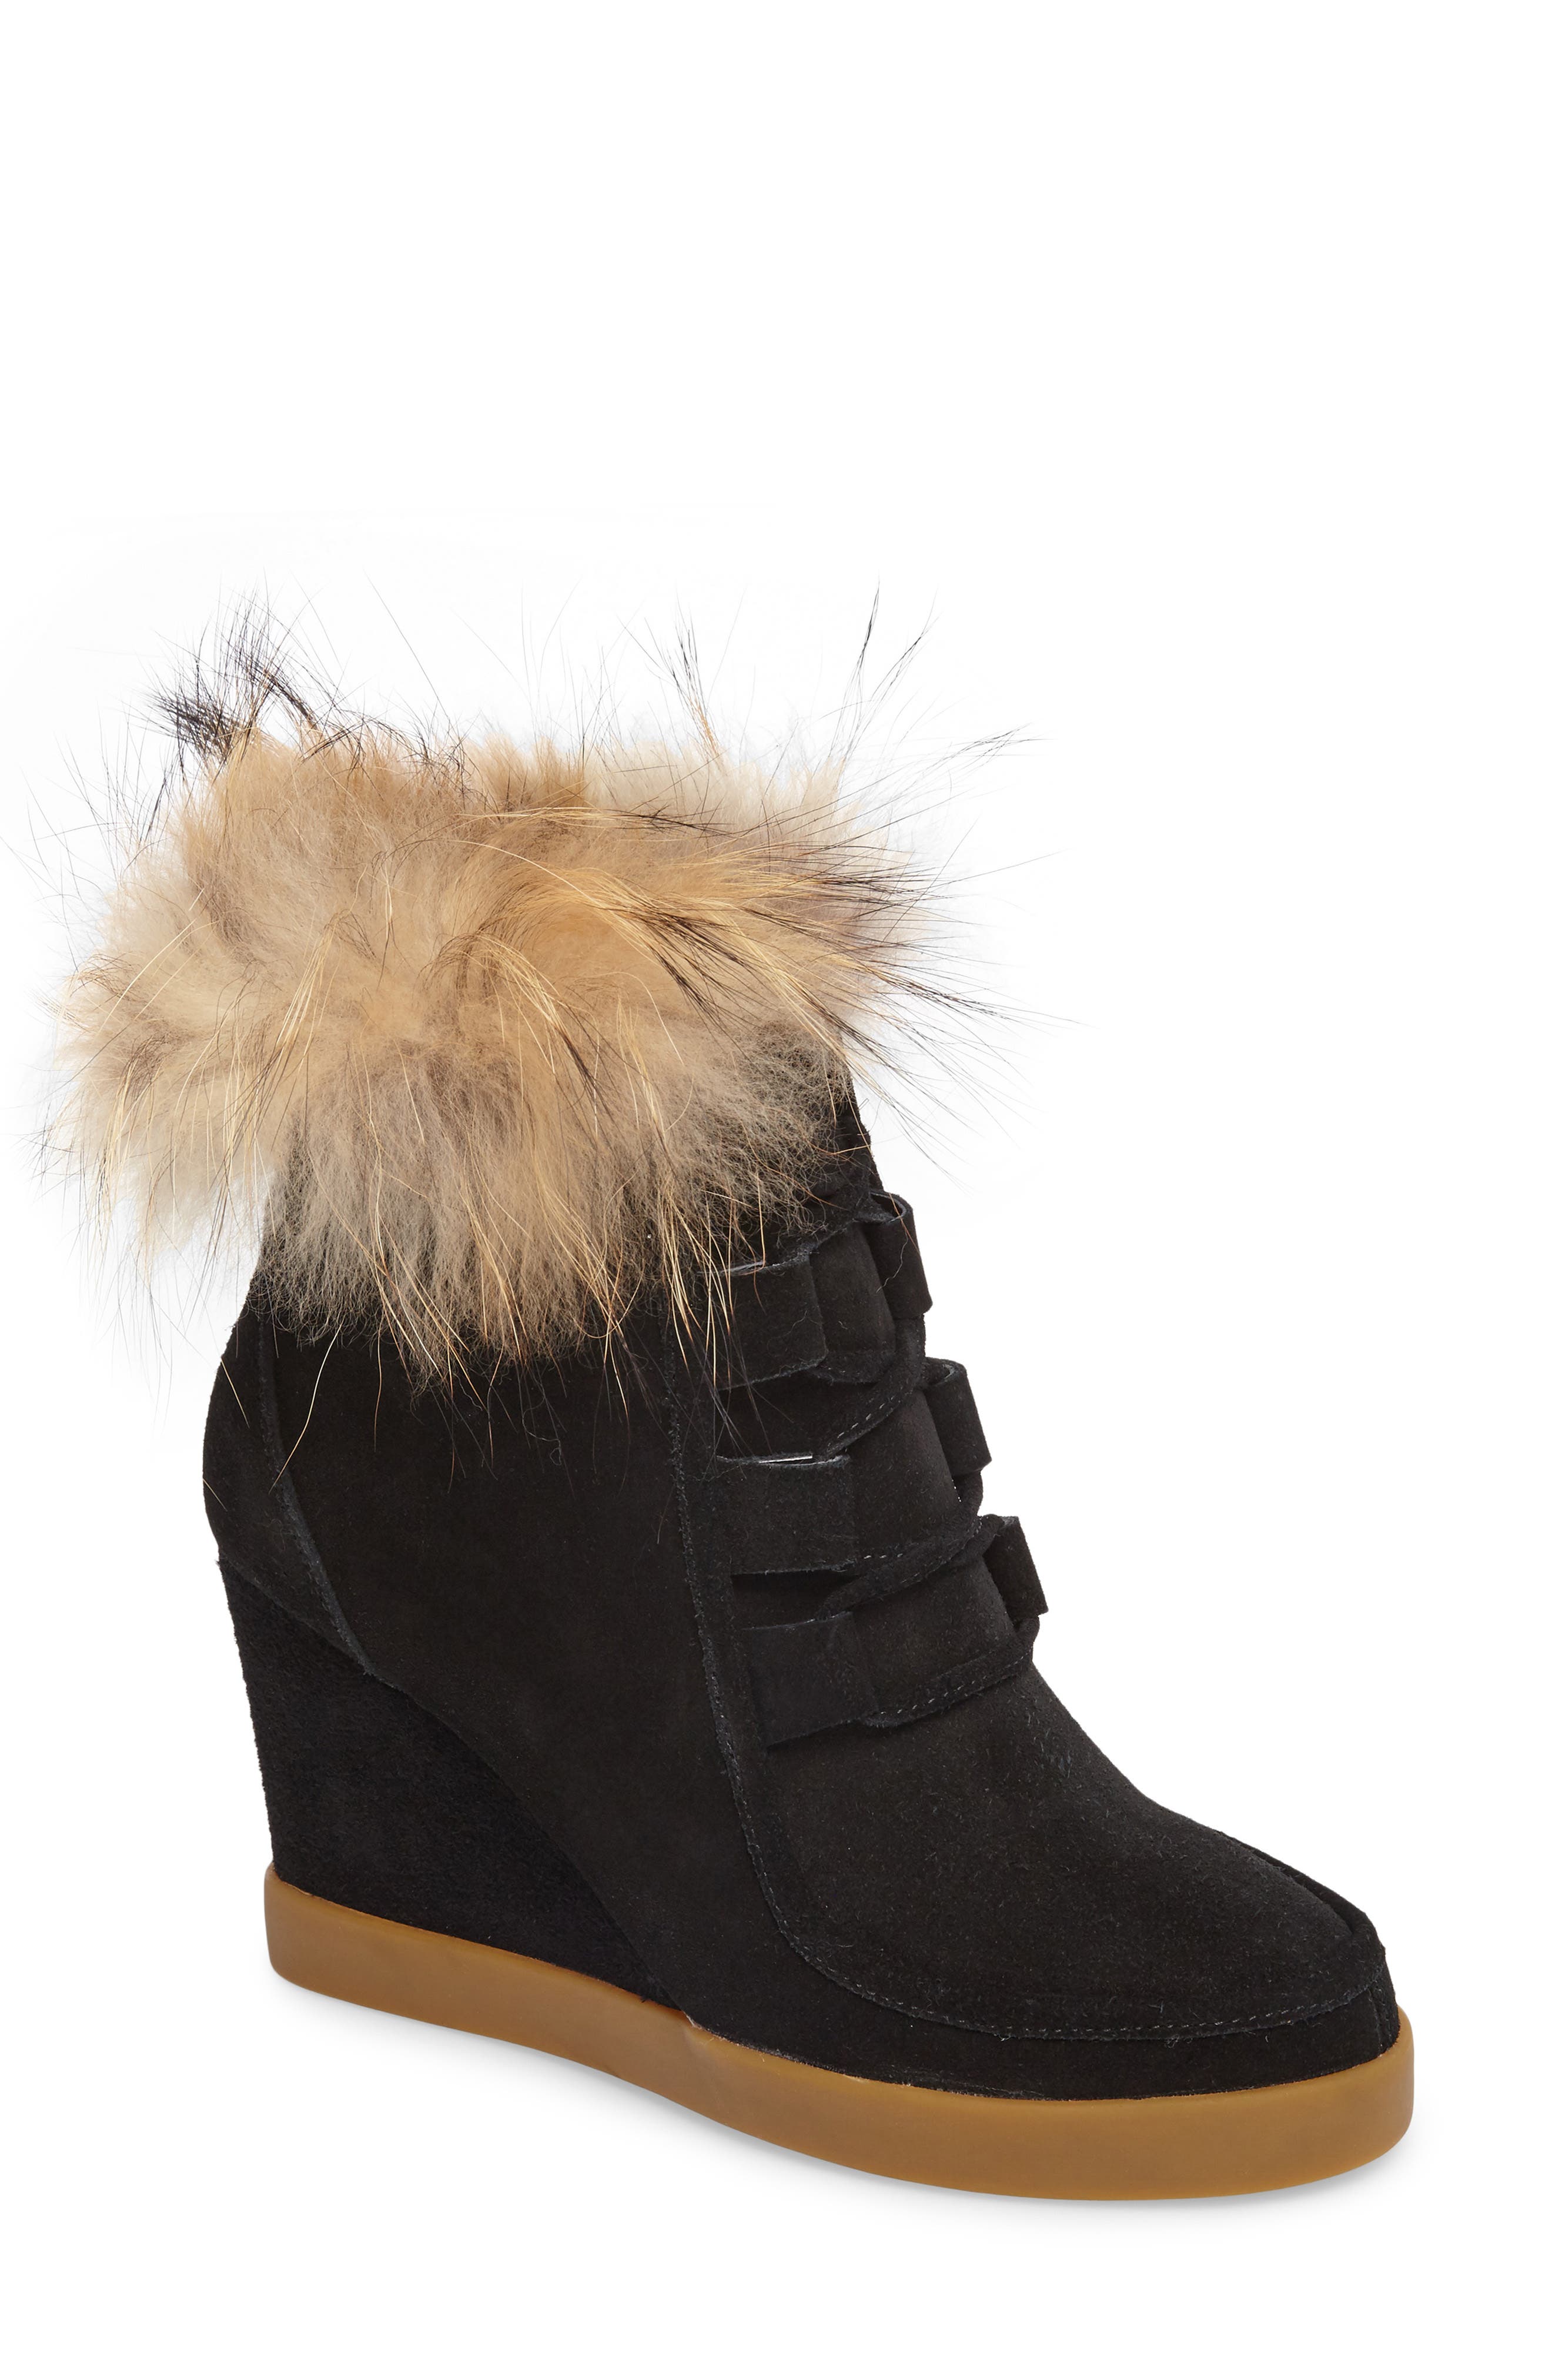 Cecelia New York Holly Wedge Bootie 